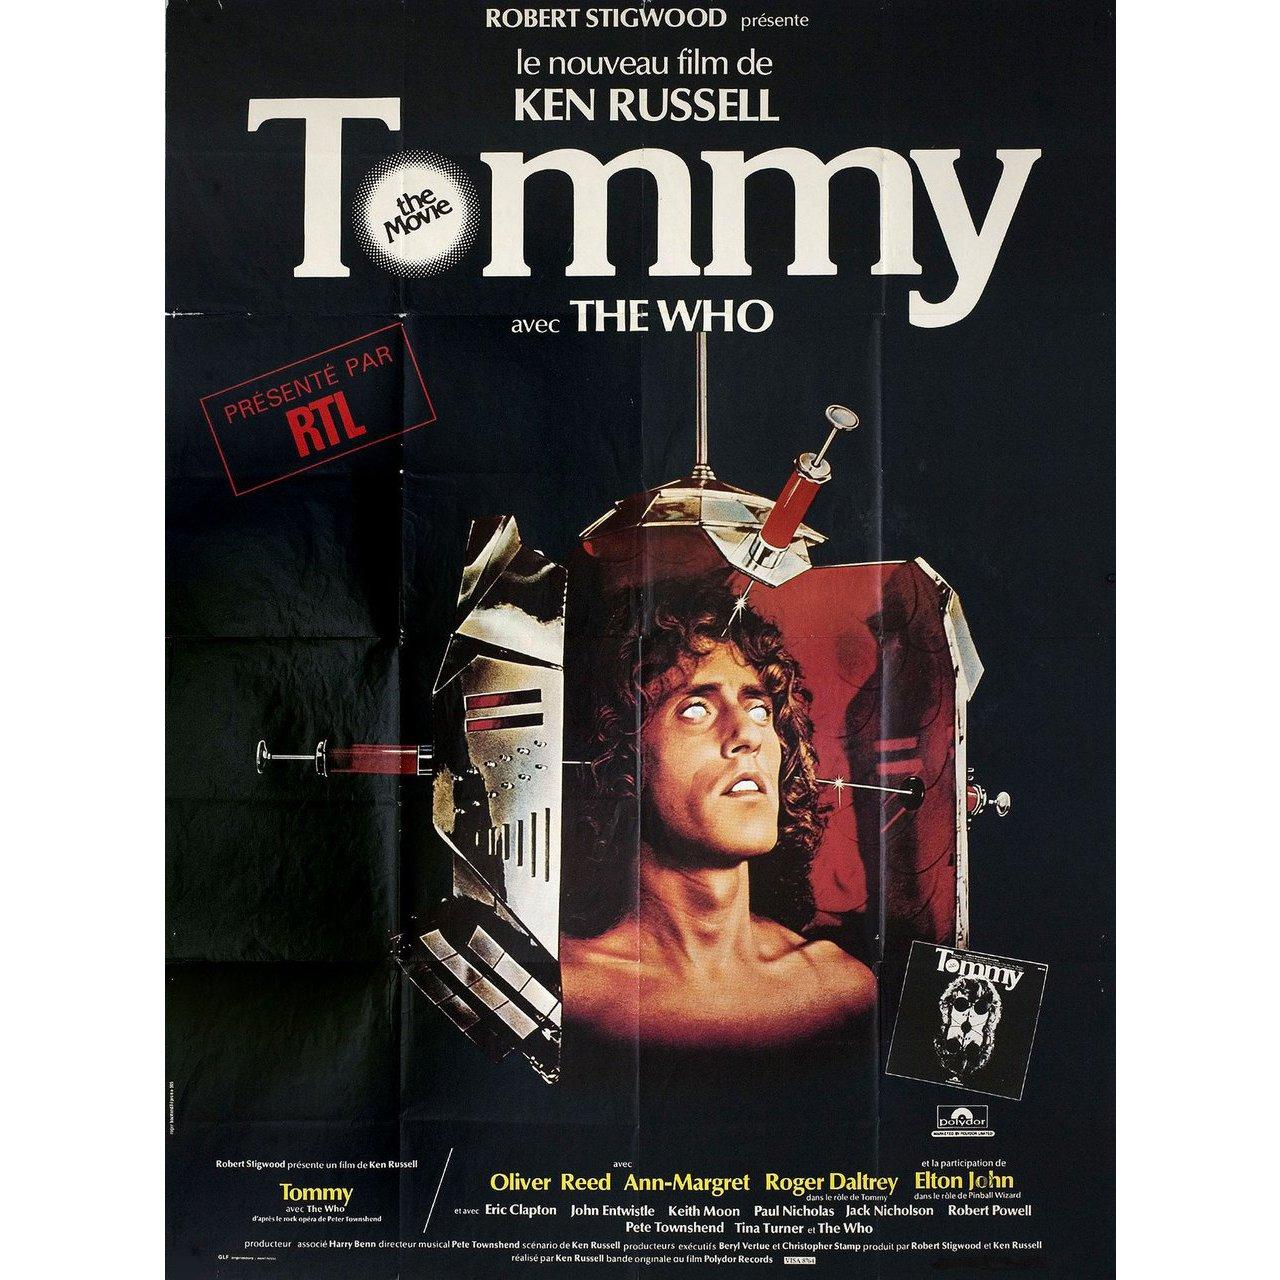 Original 1975 French grande poster for the film “Tommy” directed by Ken Russell with Oliver Reed / Ann-Margret / Roger Daltrey / Elton John. Very Good-Fine condition, folded. Many original posters were issued folded or were subsequently folded.